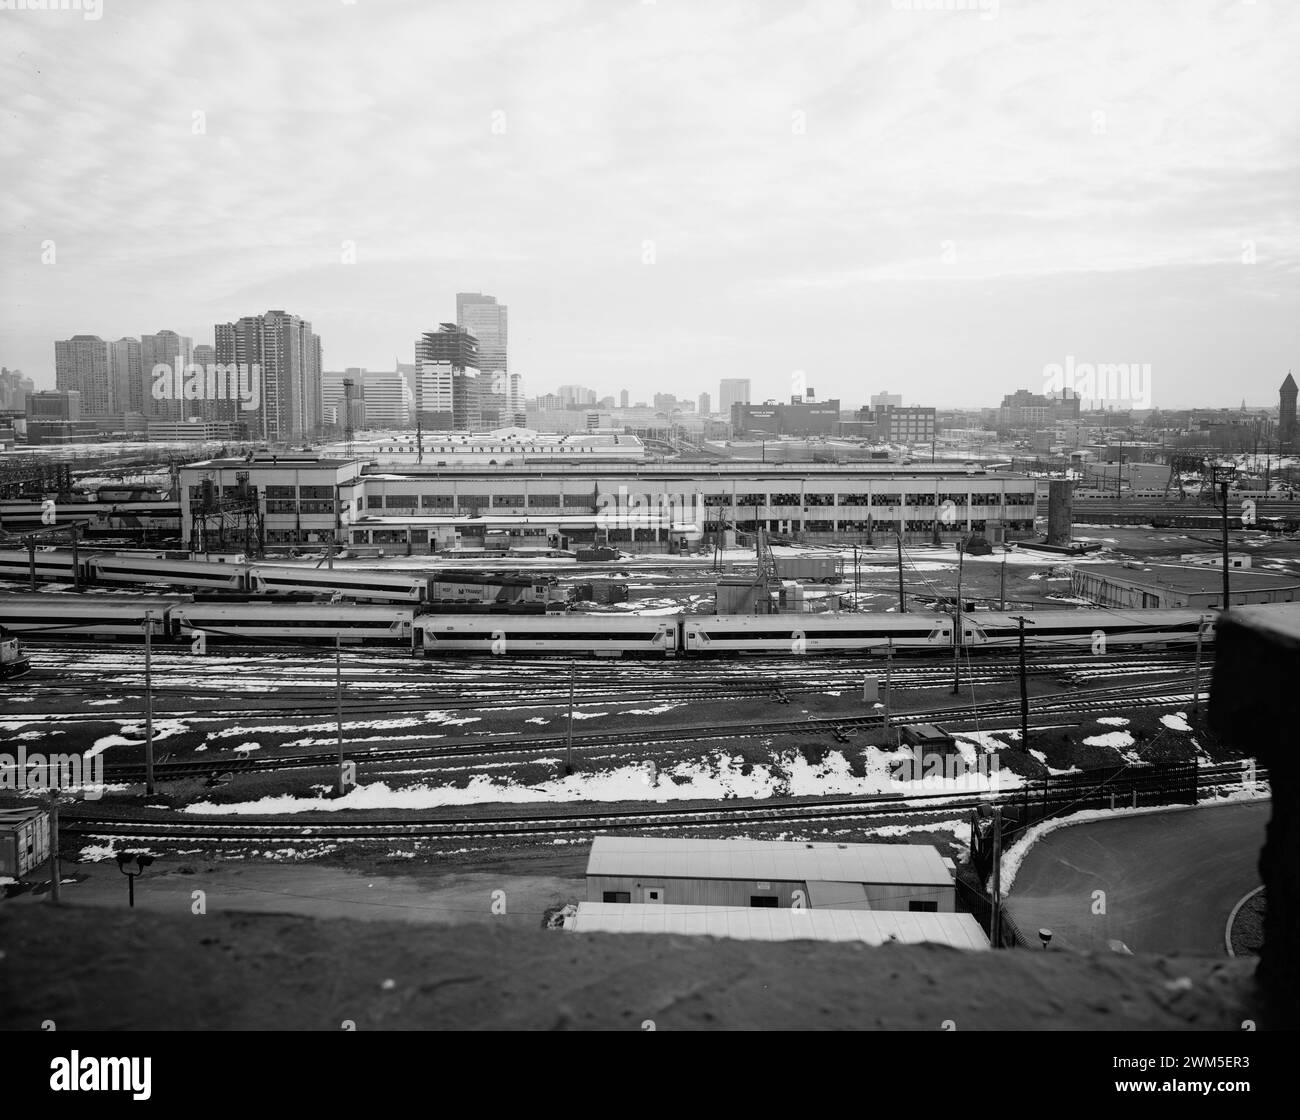 Delaware, Lackawanna and Western Railroad Freight and Rail Yard, multiple Unit Light inspection Shed, New Jersey transit Hoboken terminal Rail Yard, Hoboken, comté d'Hudson, New Jersey Banque D'Images